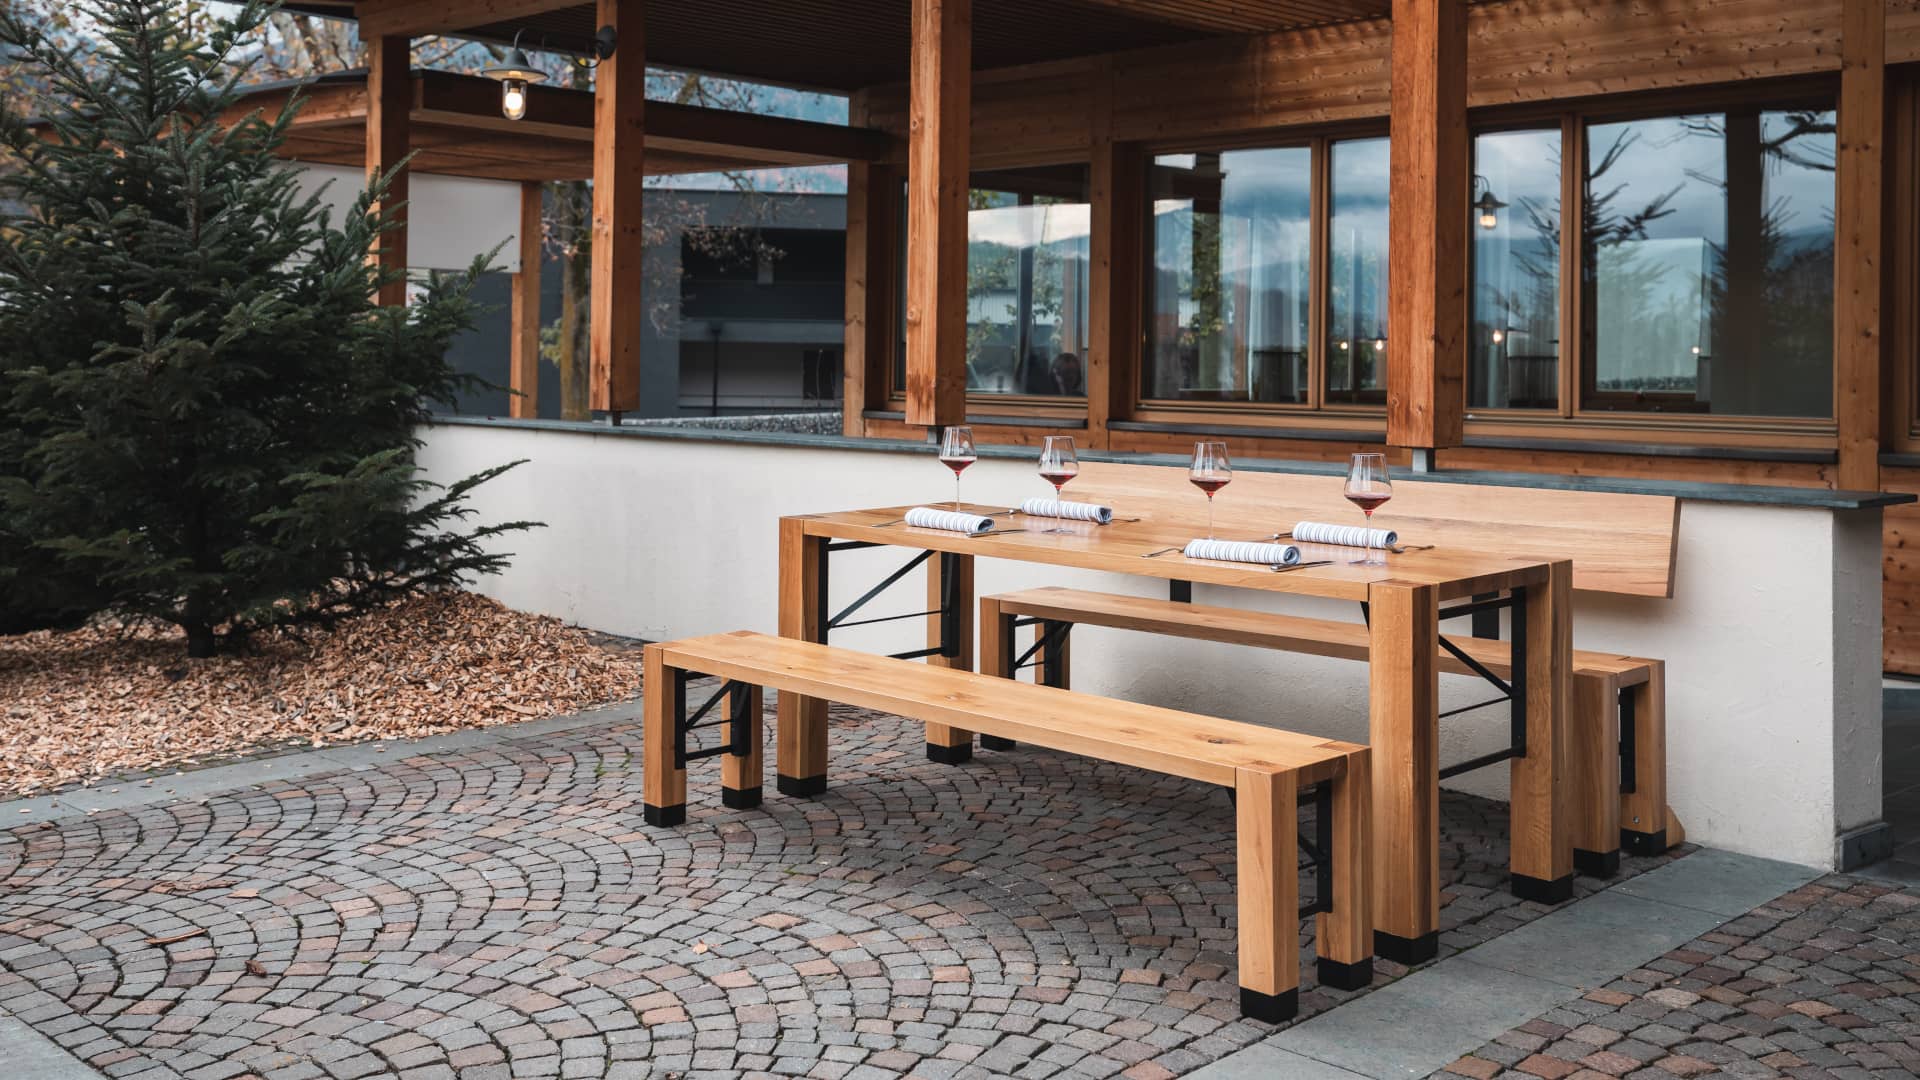 Design set Lago is placed in front of a building. One bench with backrest and one without backrest, the table is set.